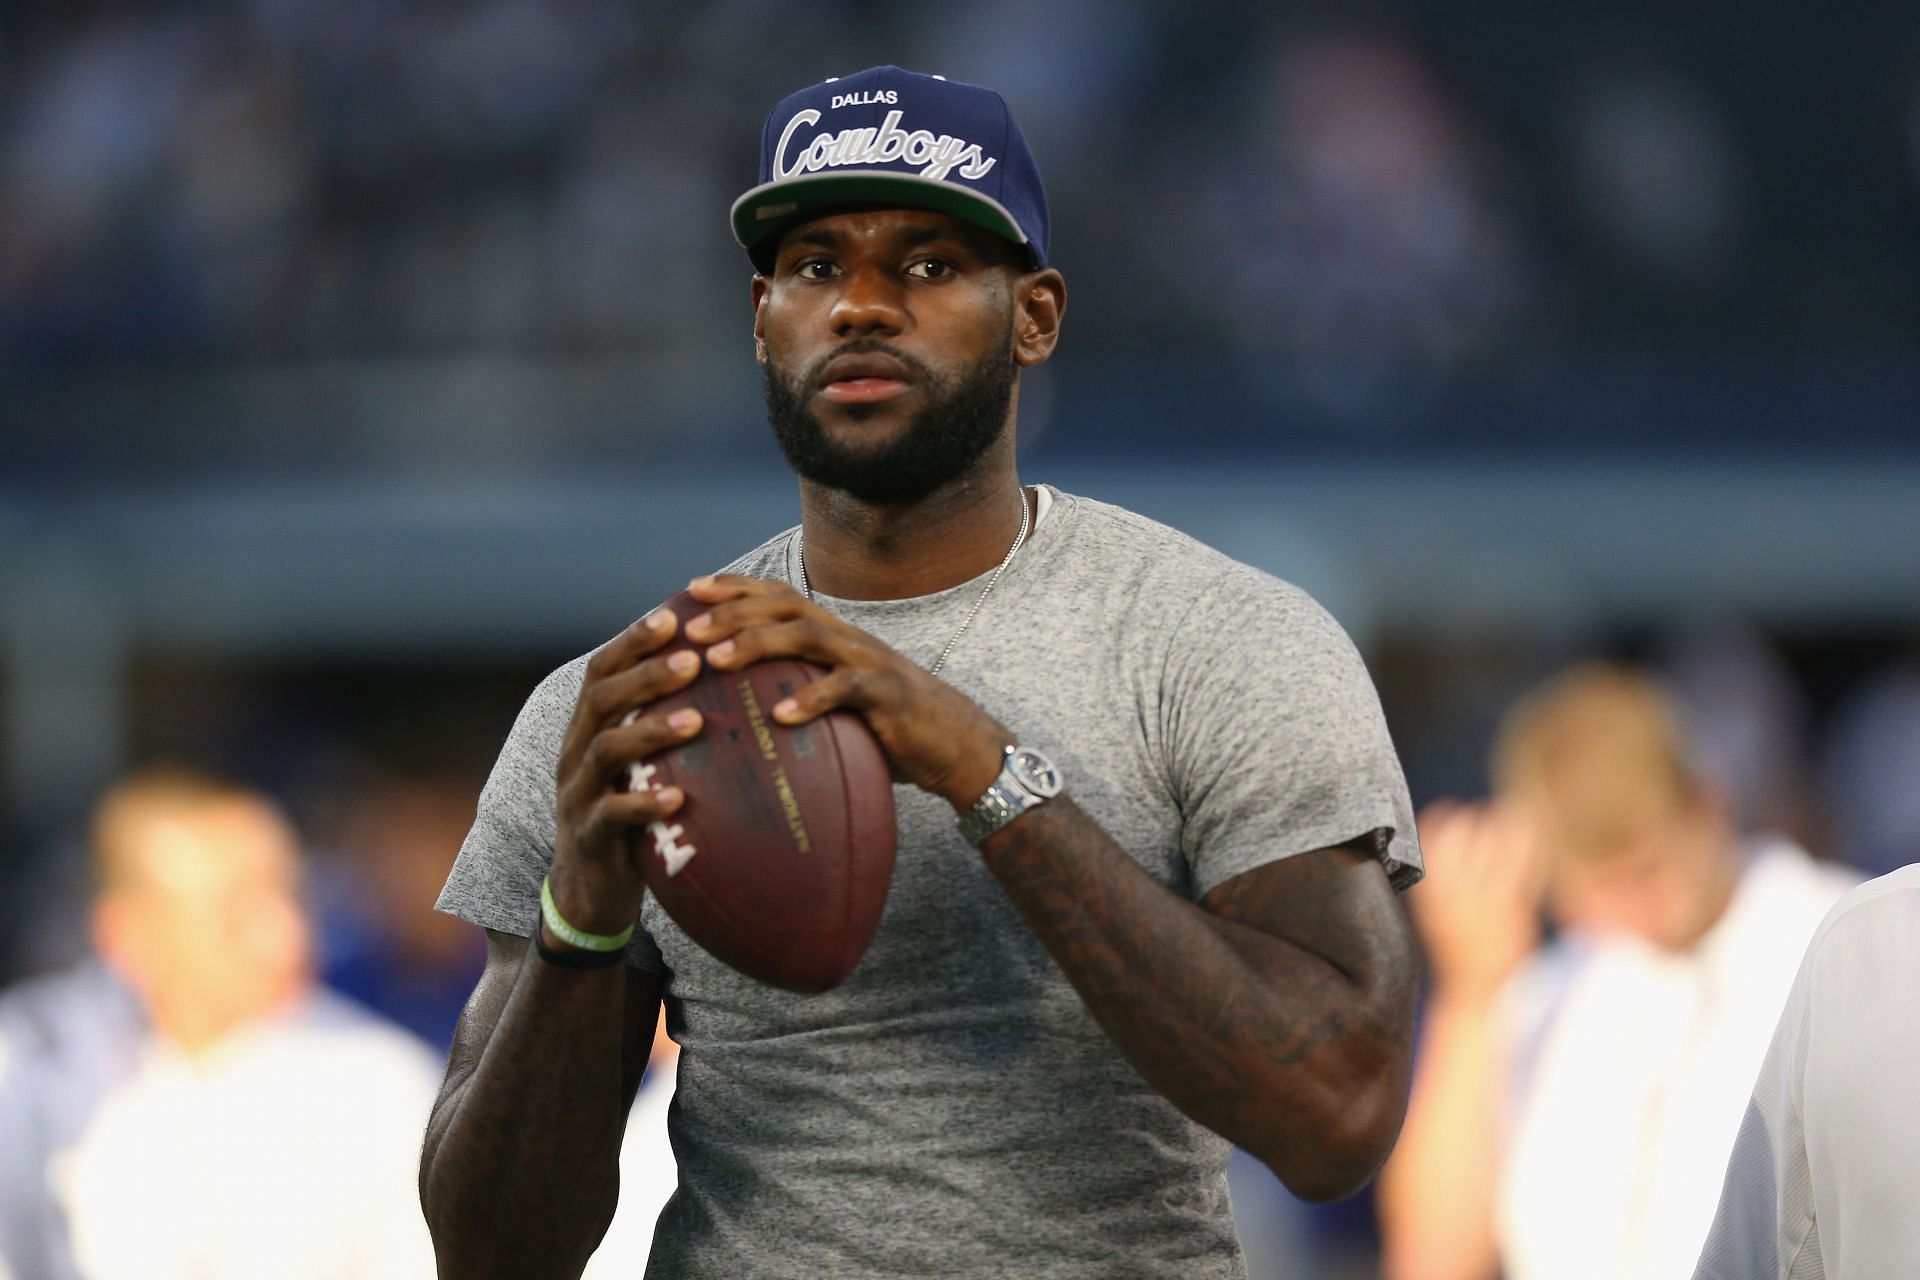 LeBron James during a game between the New York Giants and Dallas Cowboys